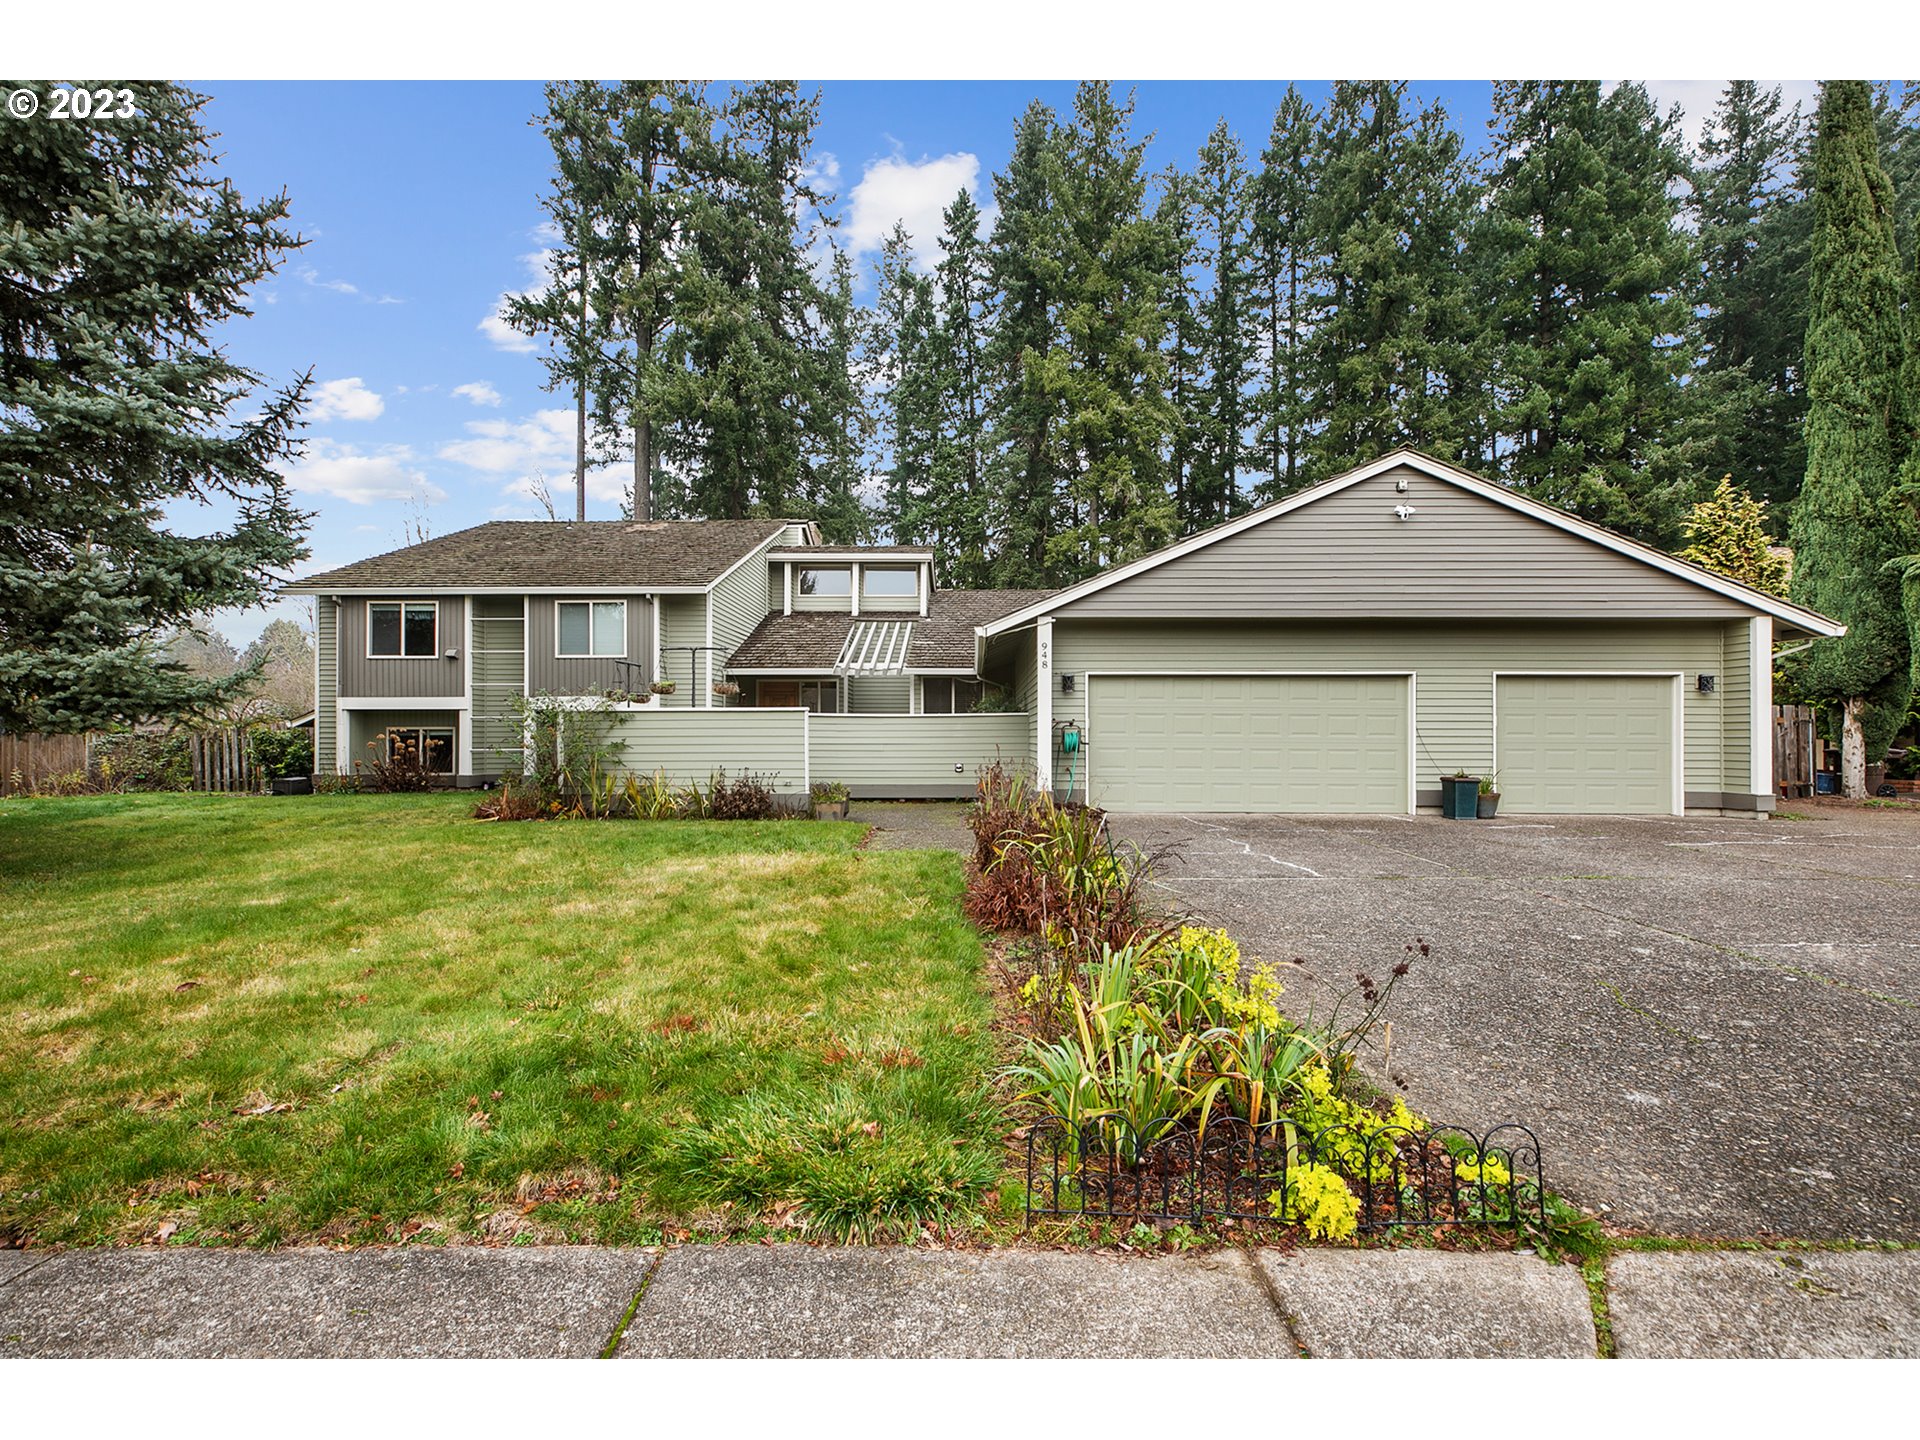 948 NW 170TH DR, Beaverton, OR 